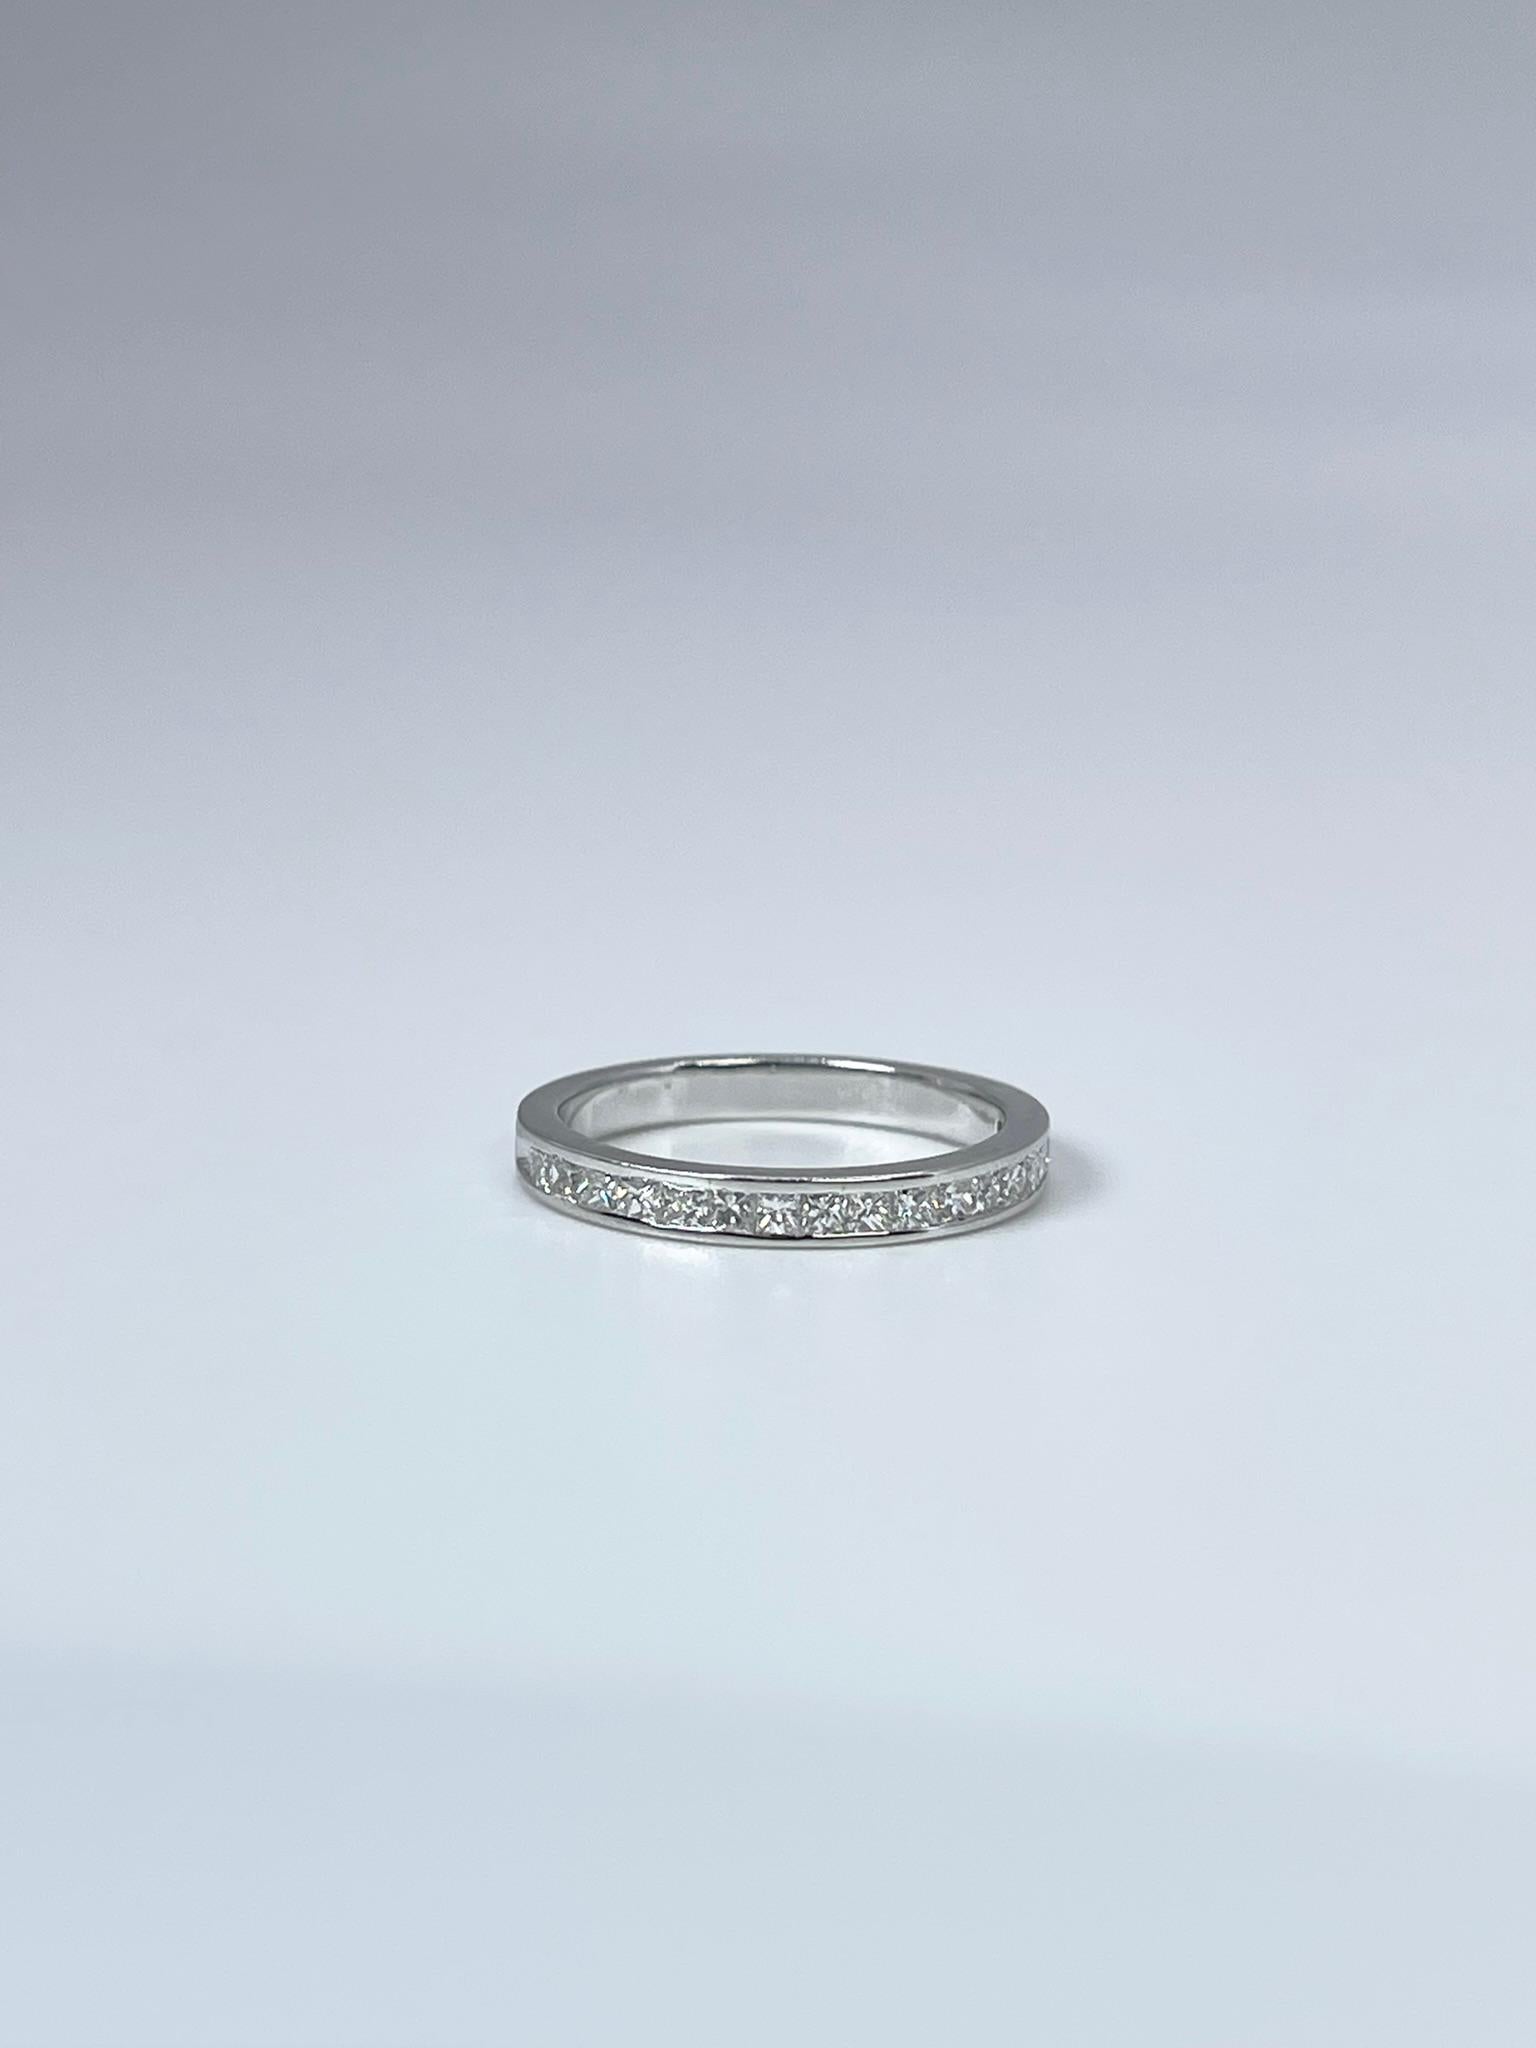 Diamond ring made in 14KT white gold.

GRAM WEIGHT: 2.10gr
METAL: 14KT white gold

NATURAL DIAMOND(S)
Cut: Princess cut
Color: G 
Clarity: SI 
Carat: 0.41ct
Size: 5 ( can be re-sized)
Item number: 110-00006 ETT


WHAT YOU GET AT STAMPAR